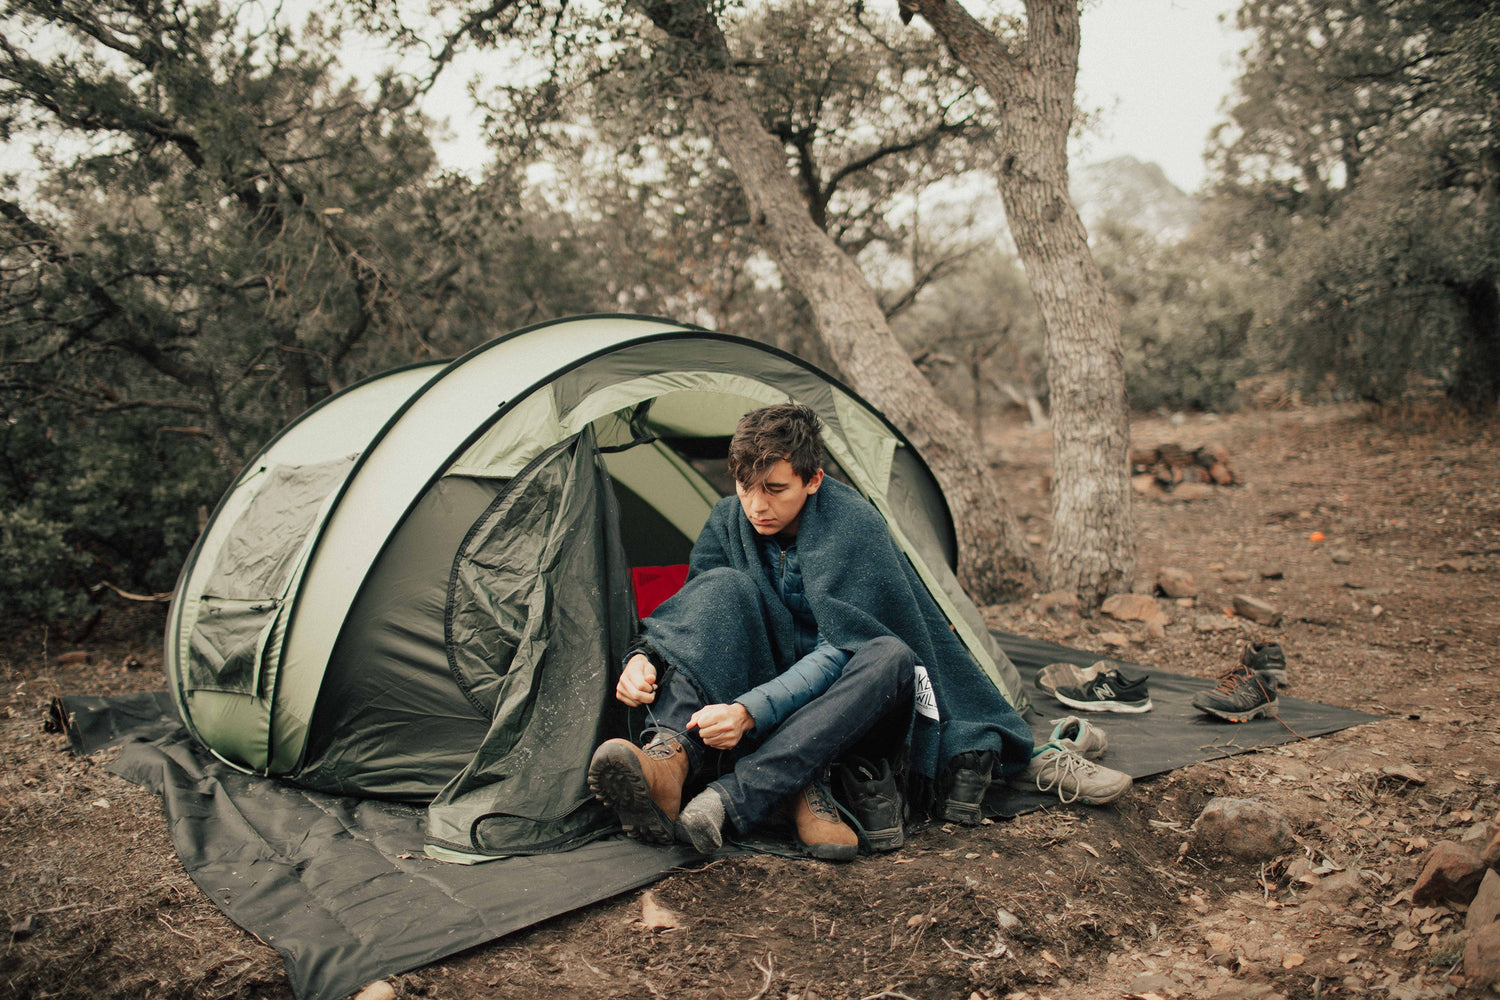 Camping Supplies You Can't Leave Home Without